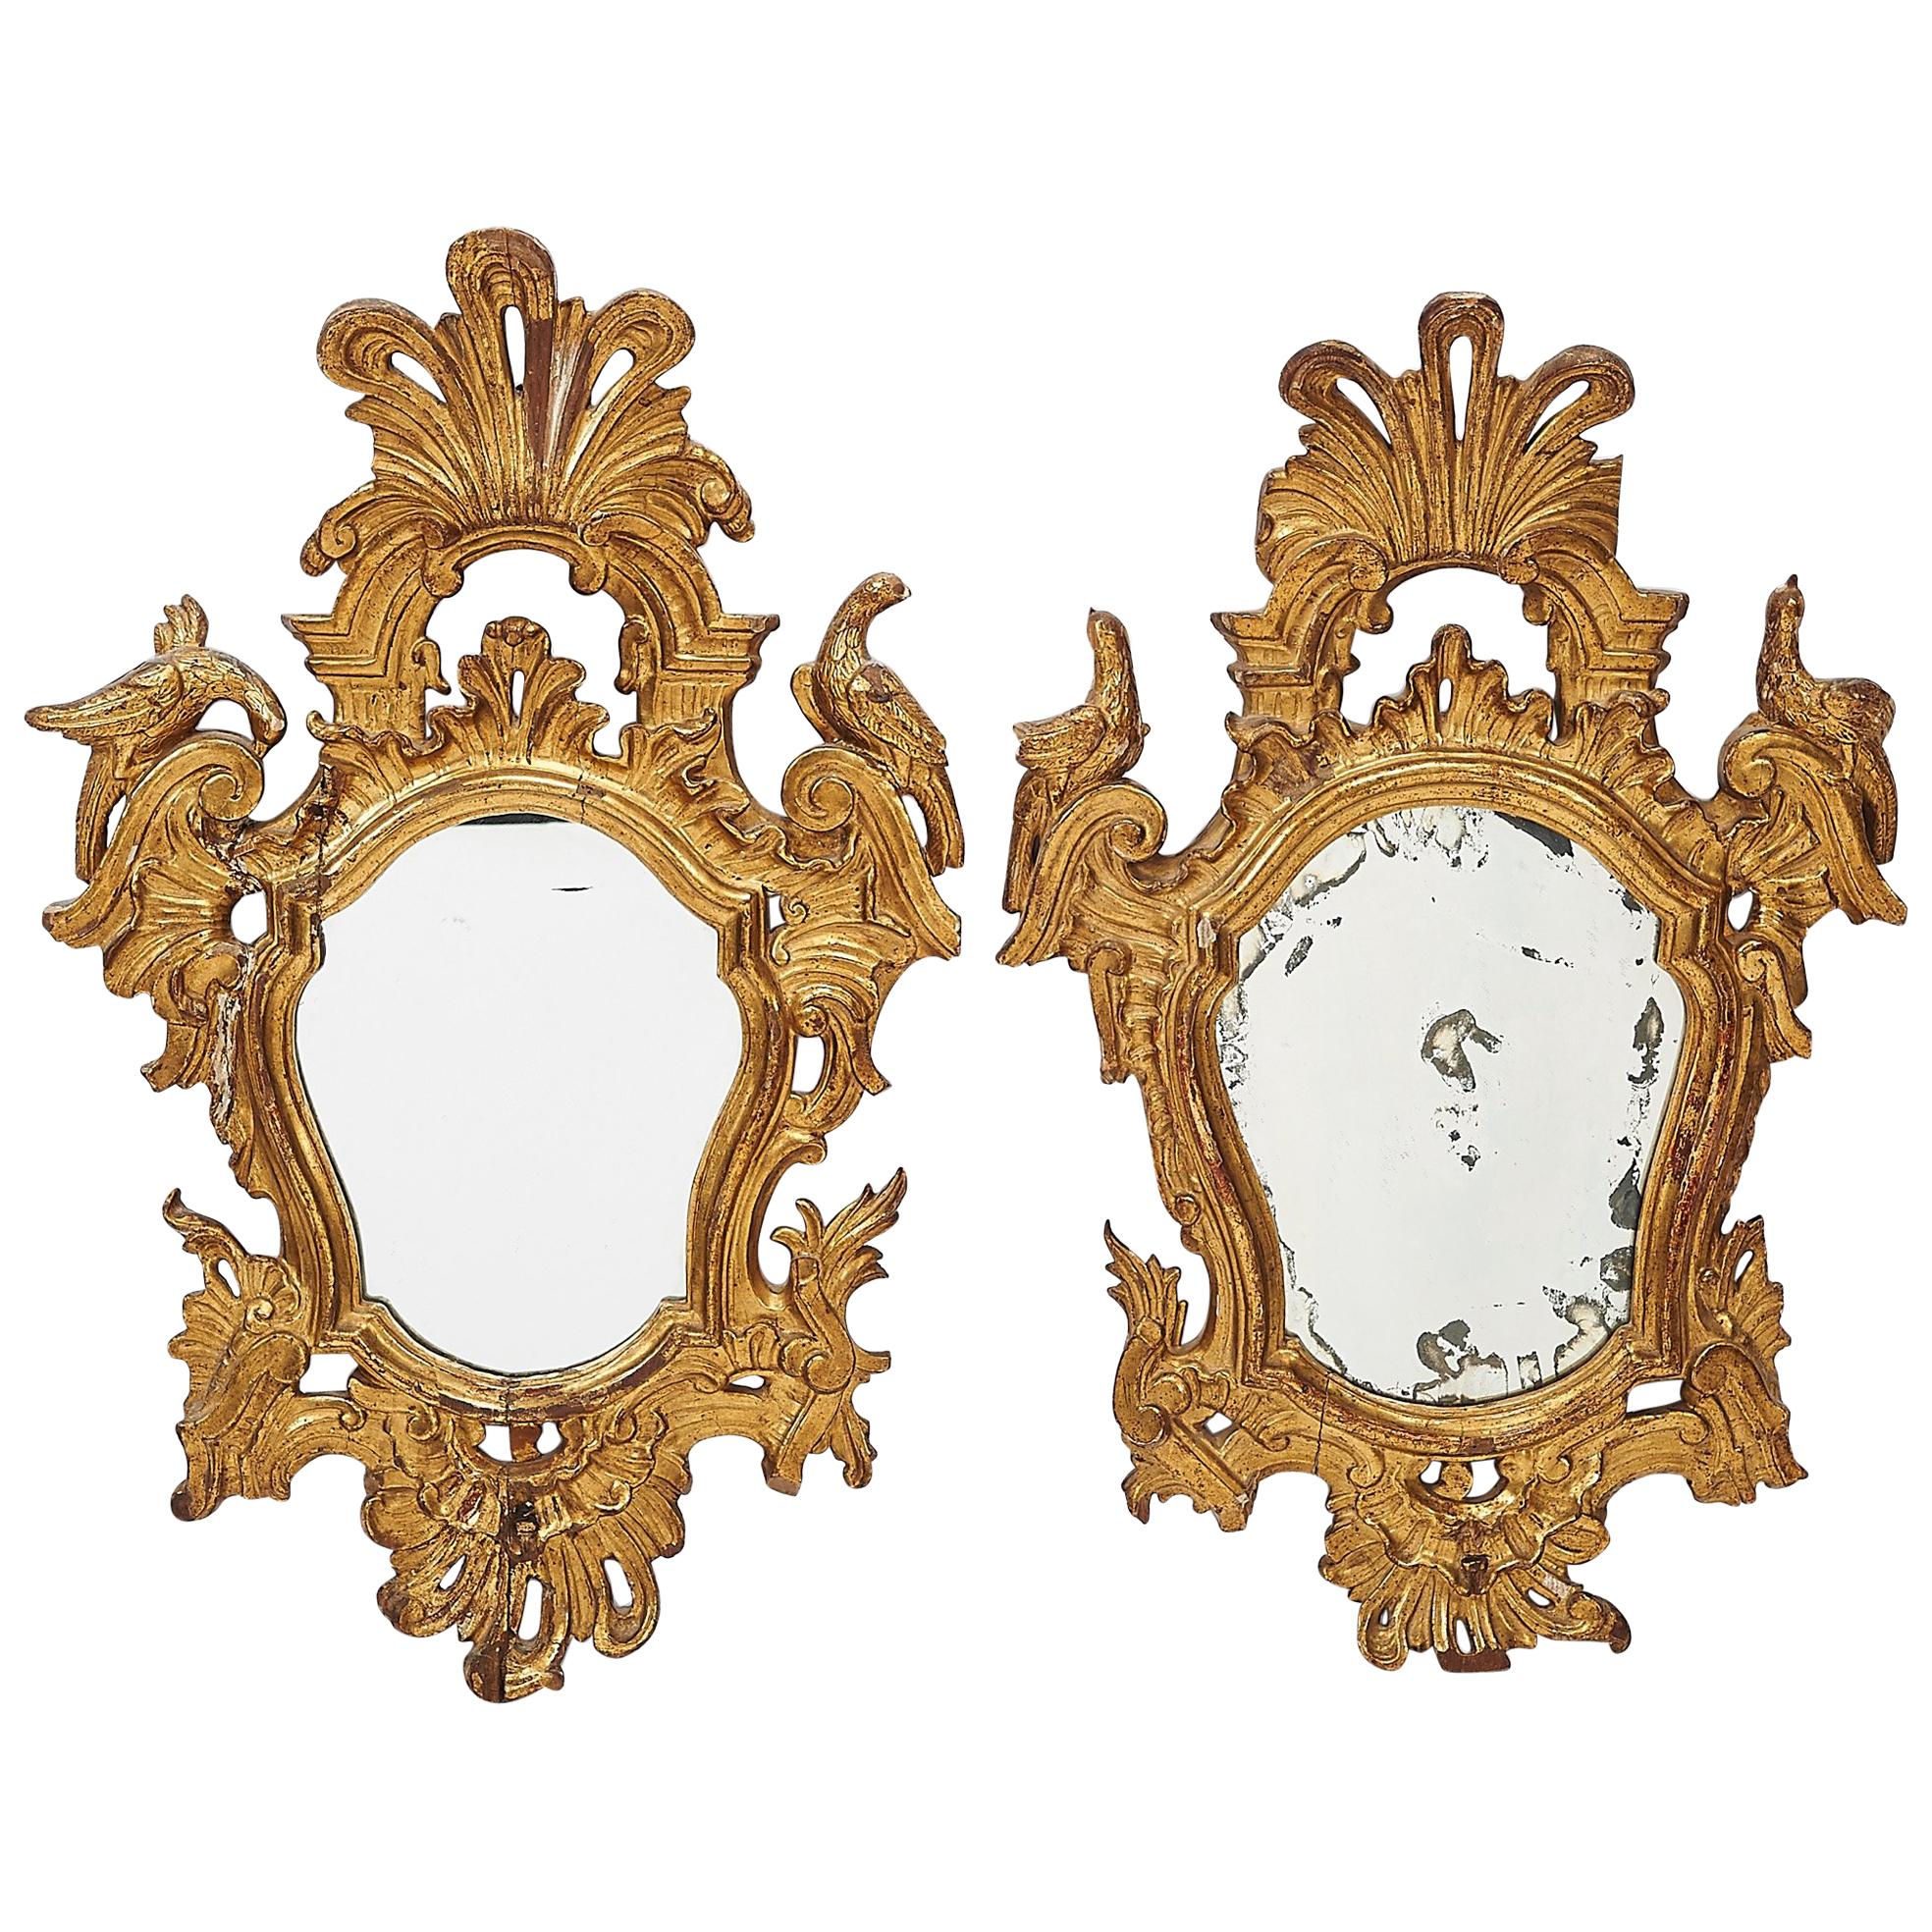 Pair of Mirrors in Carved and Guilt Wood, Spanish, 18th Century For Sale